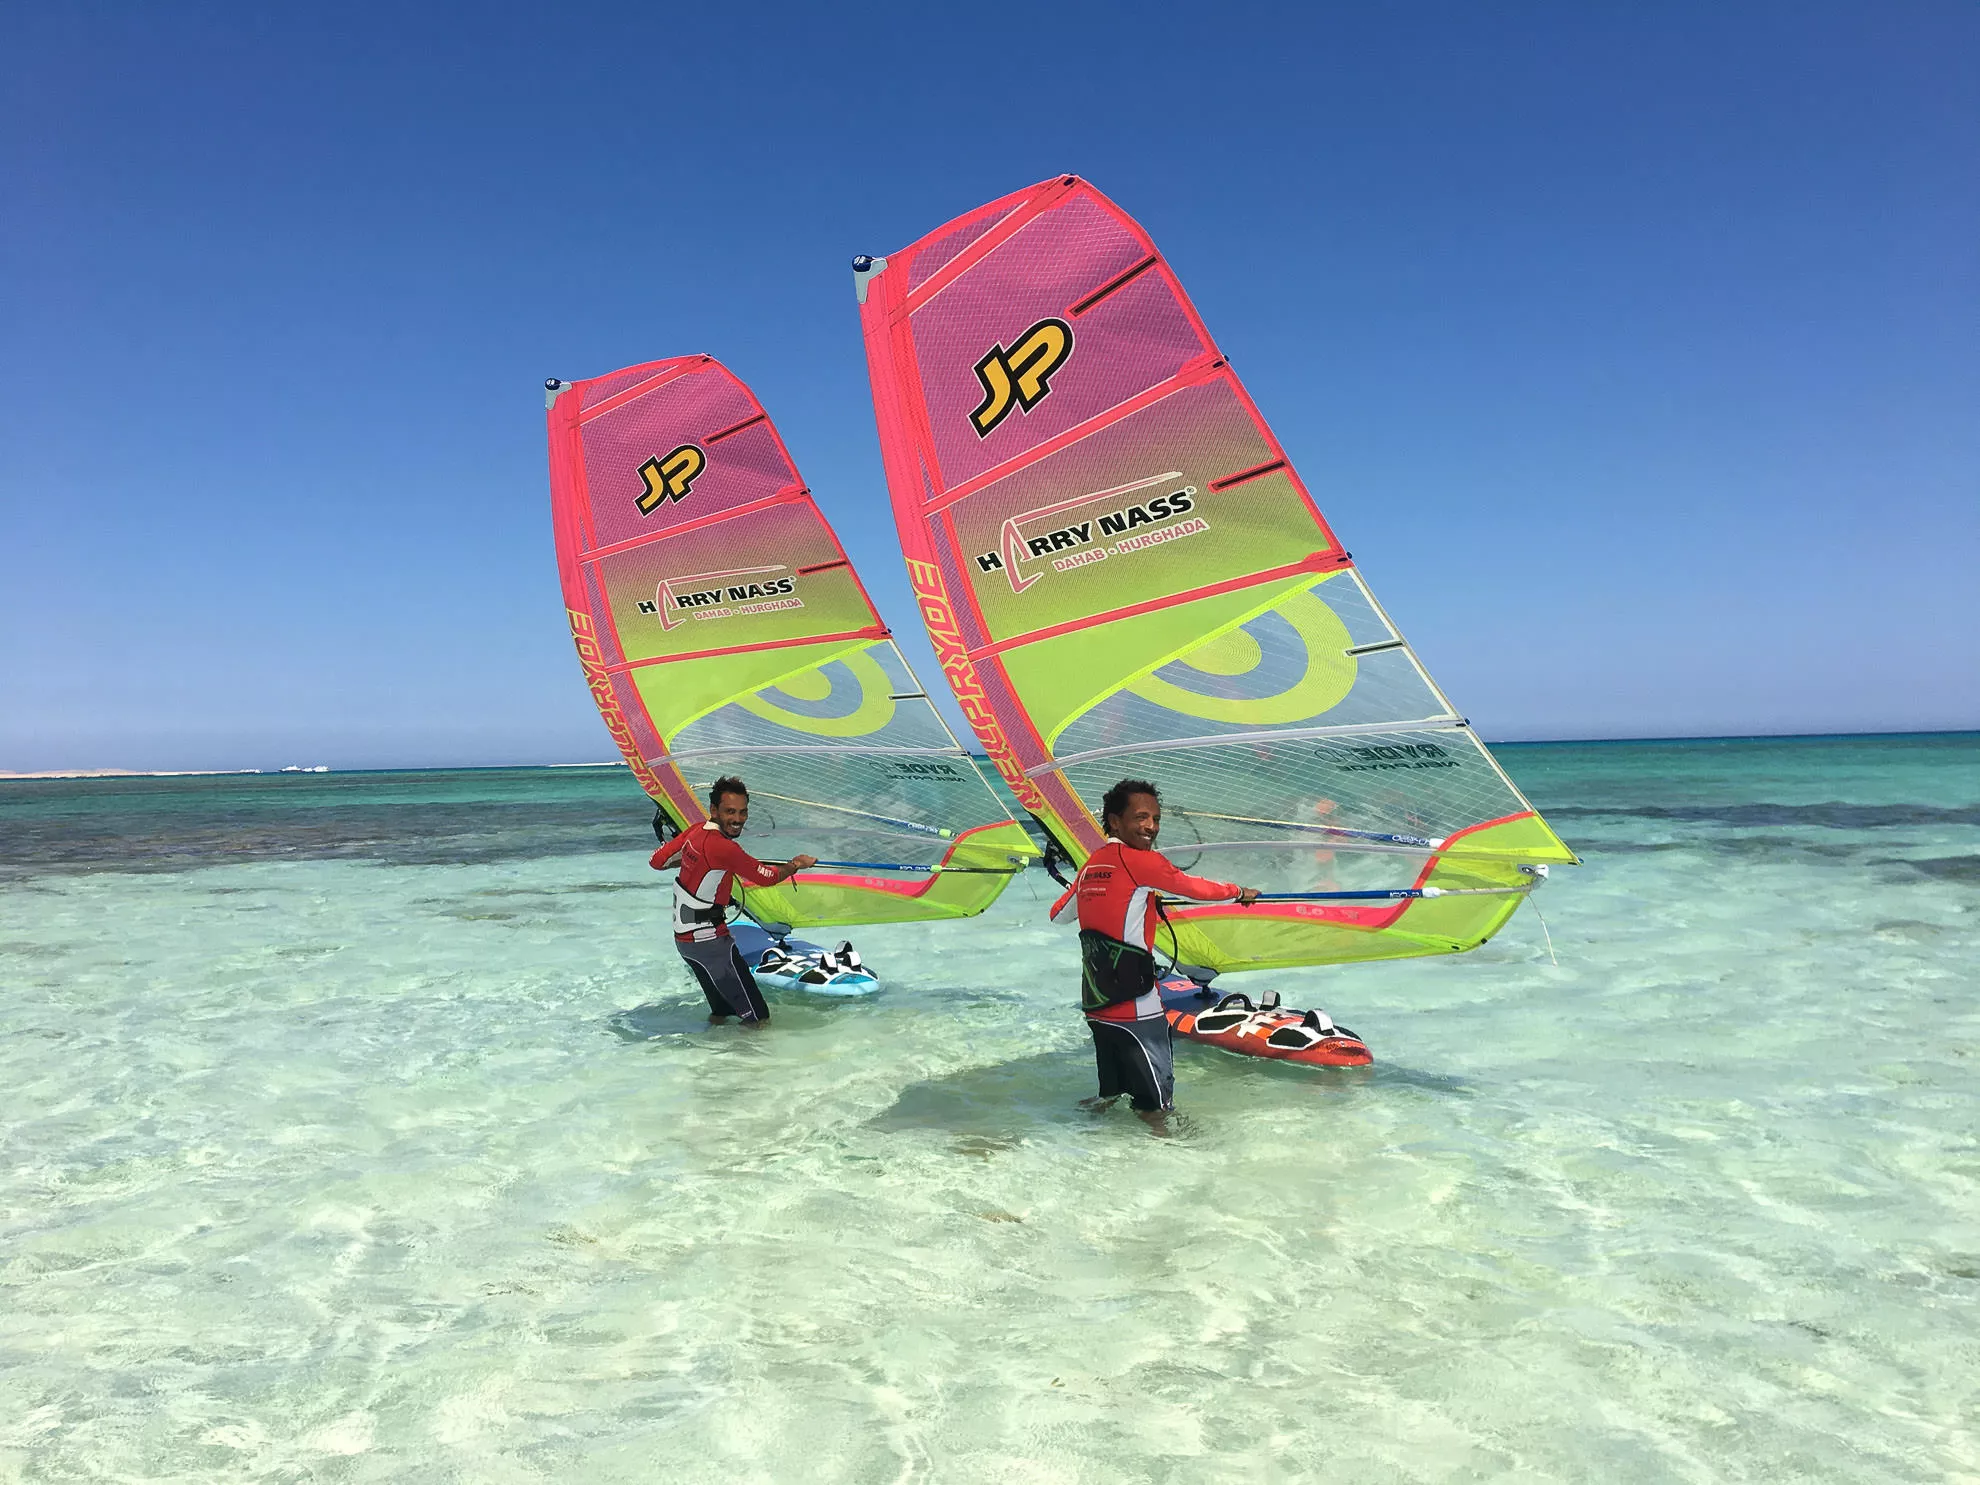 Surf Center Lido Blu in Italy, Europe | Windsurfing - Rated 1.7